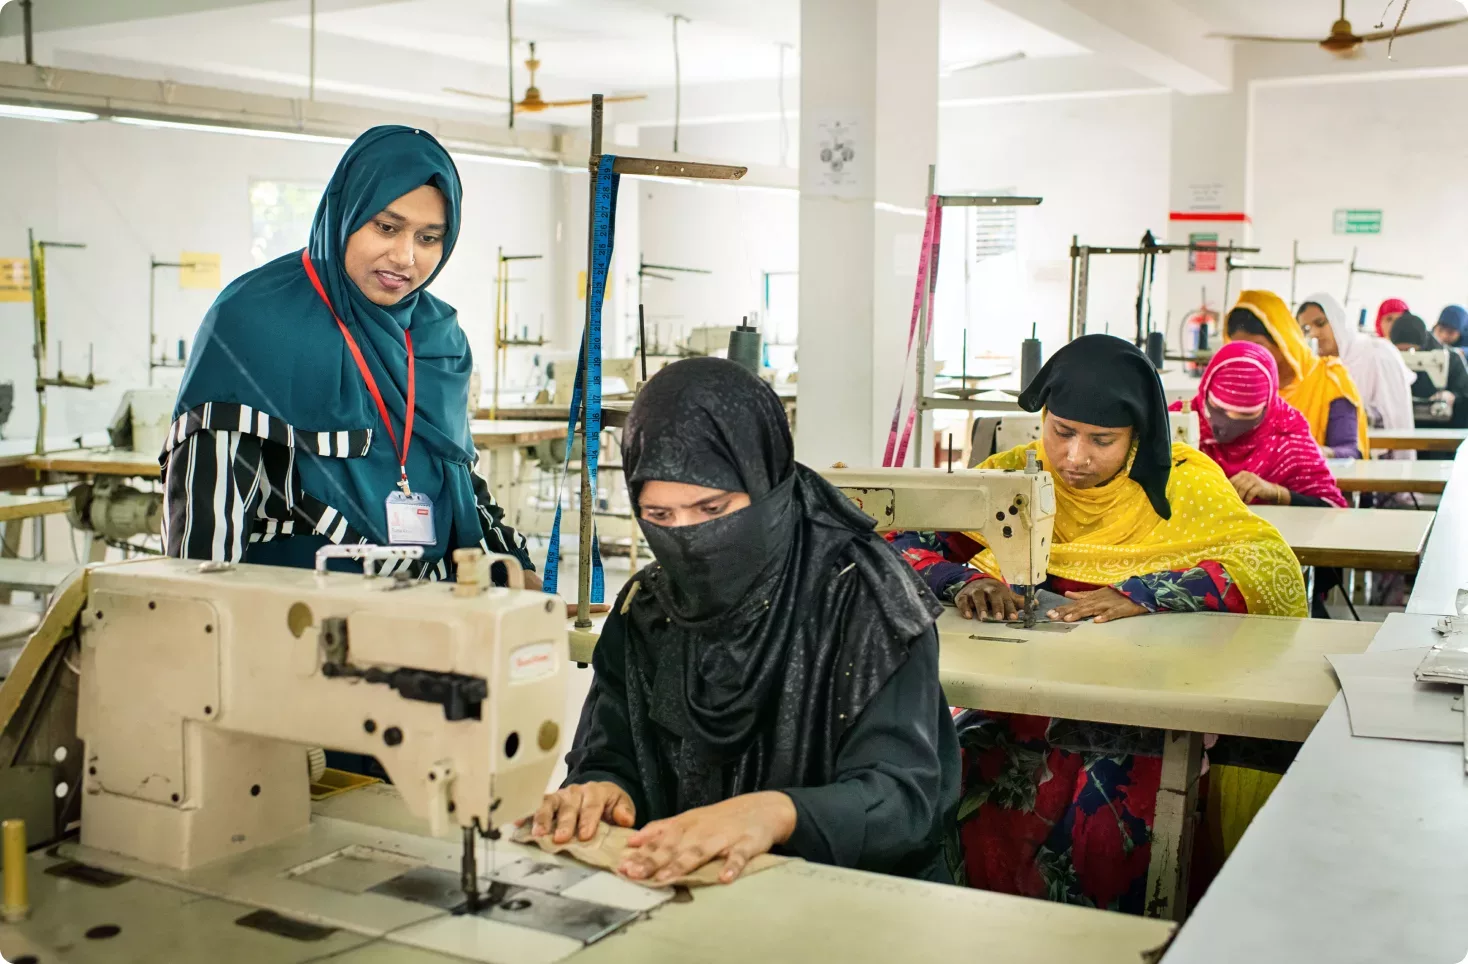 Ruma oversees a line of women in the garment factory while they sit and work on sewing machines.